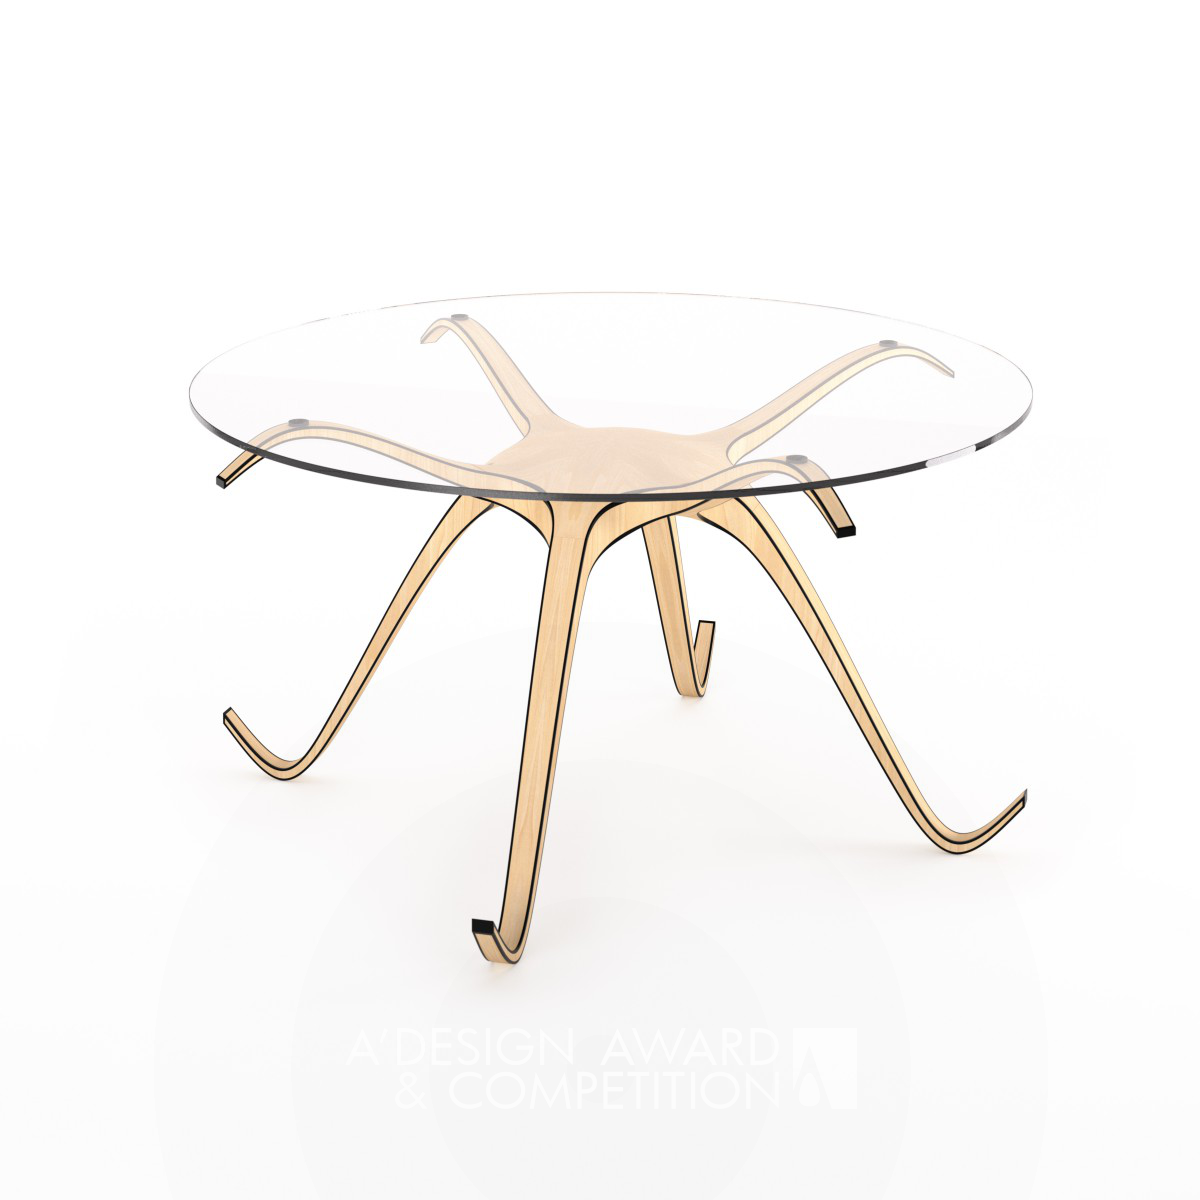 Octopia Table by Eckhard Beger